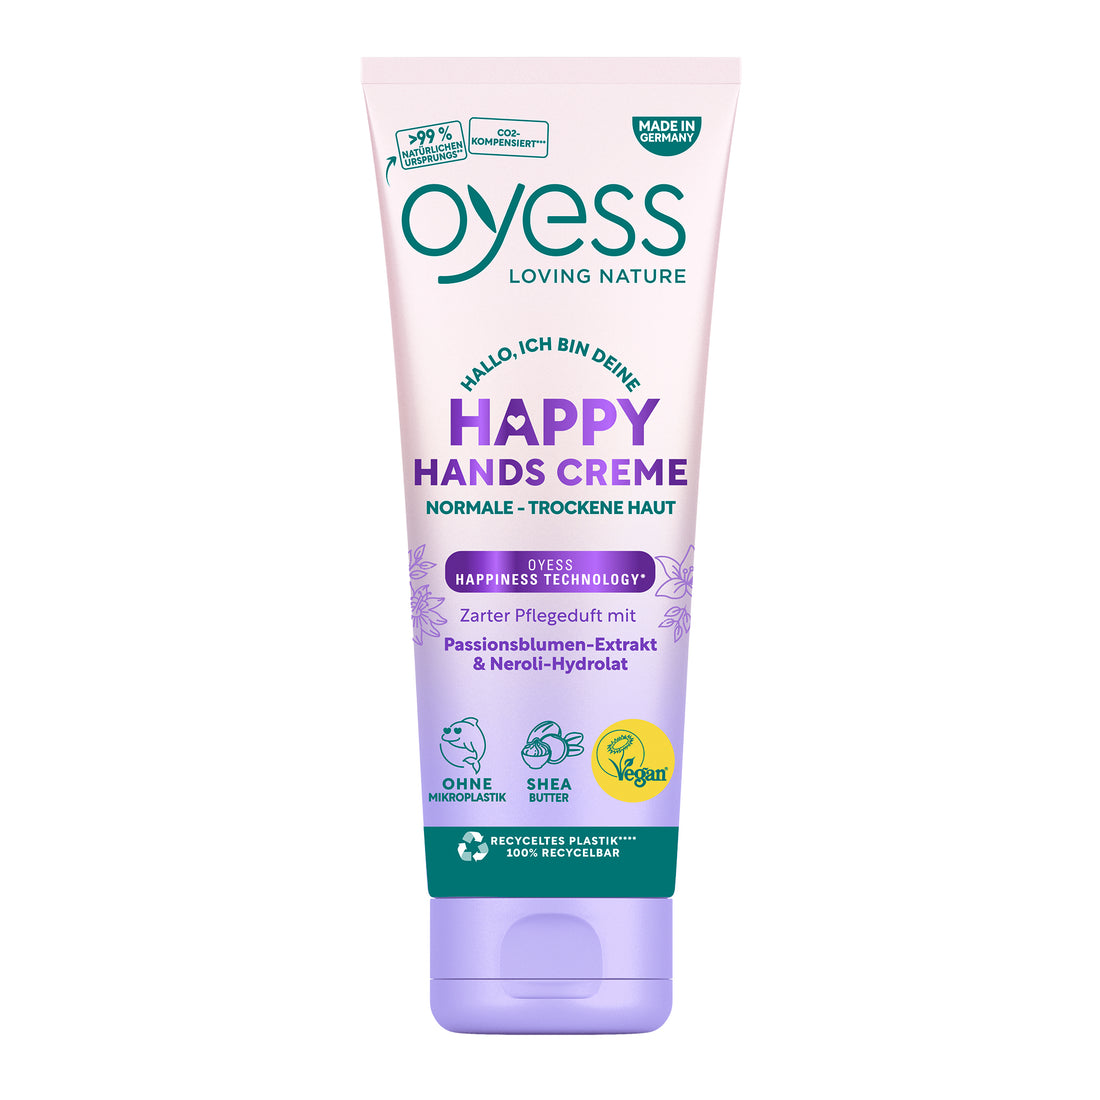 OYESS Happy Hands Creme - Caring 